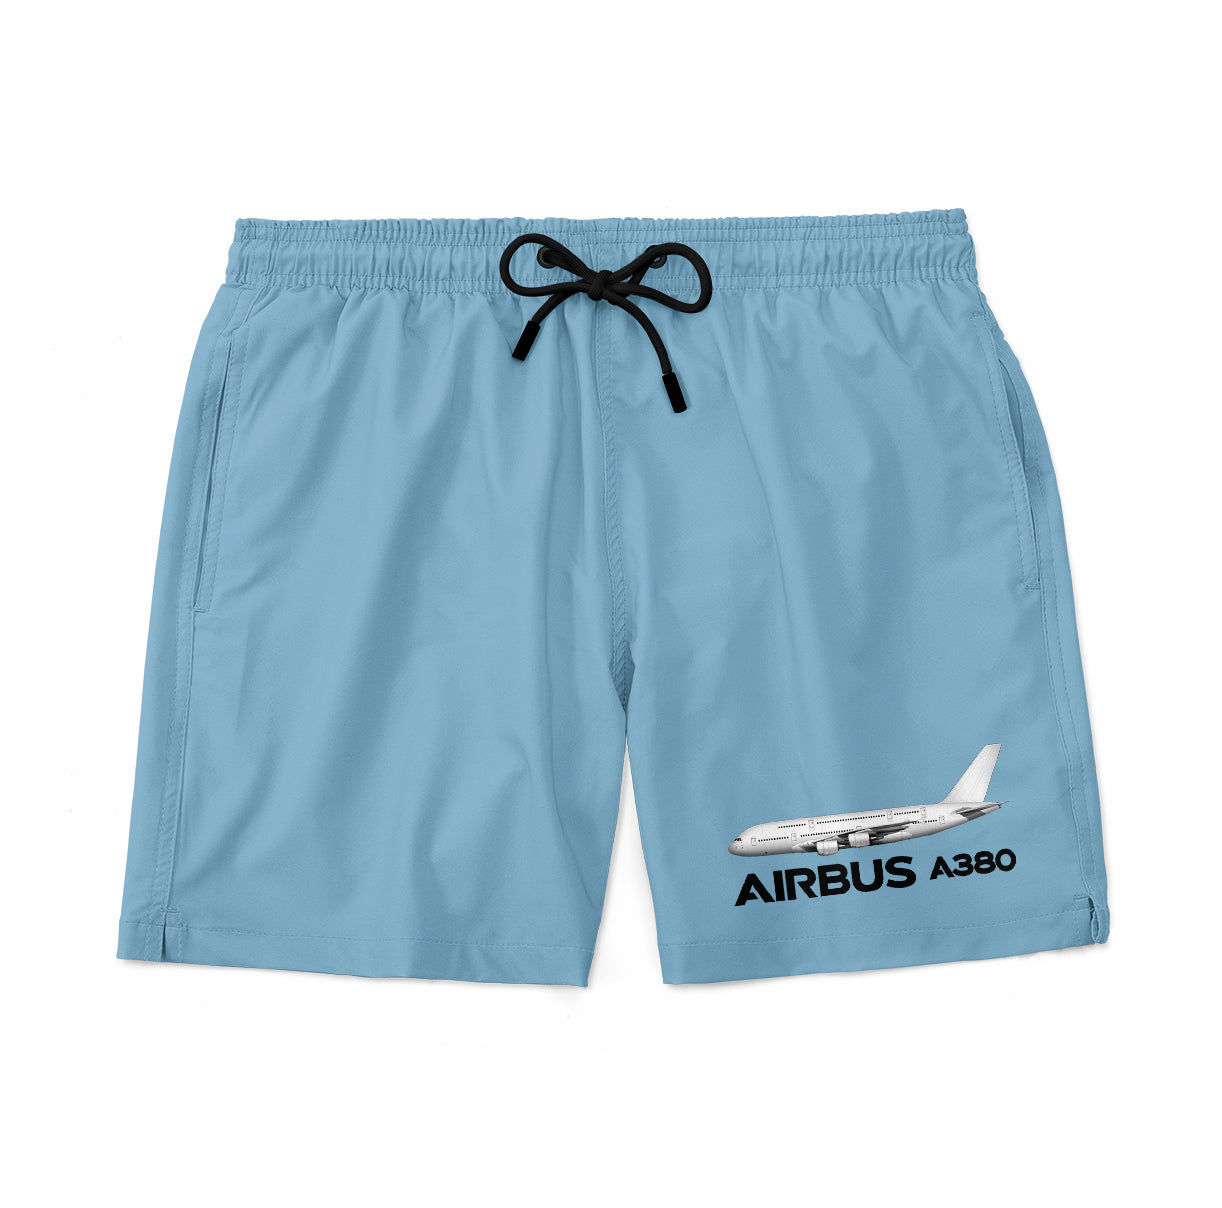 The Airbus A380 Designed Swim Trunks & Shorts